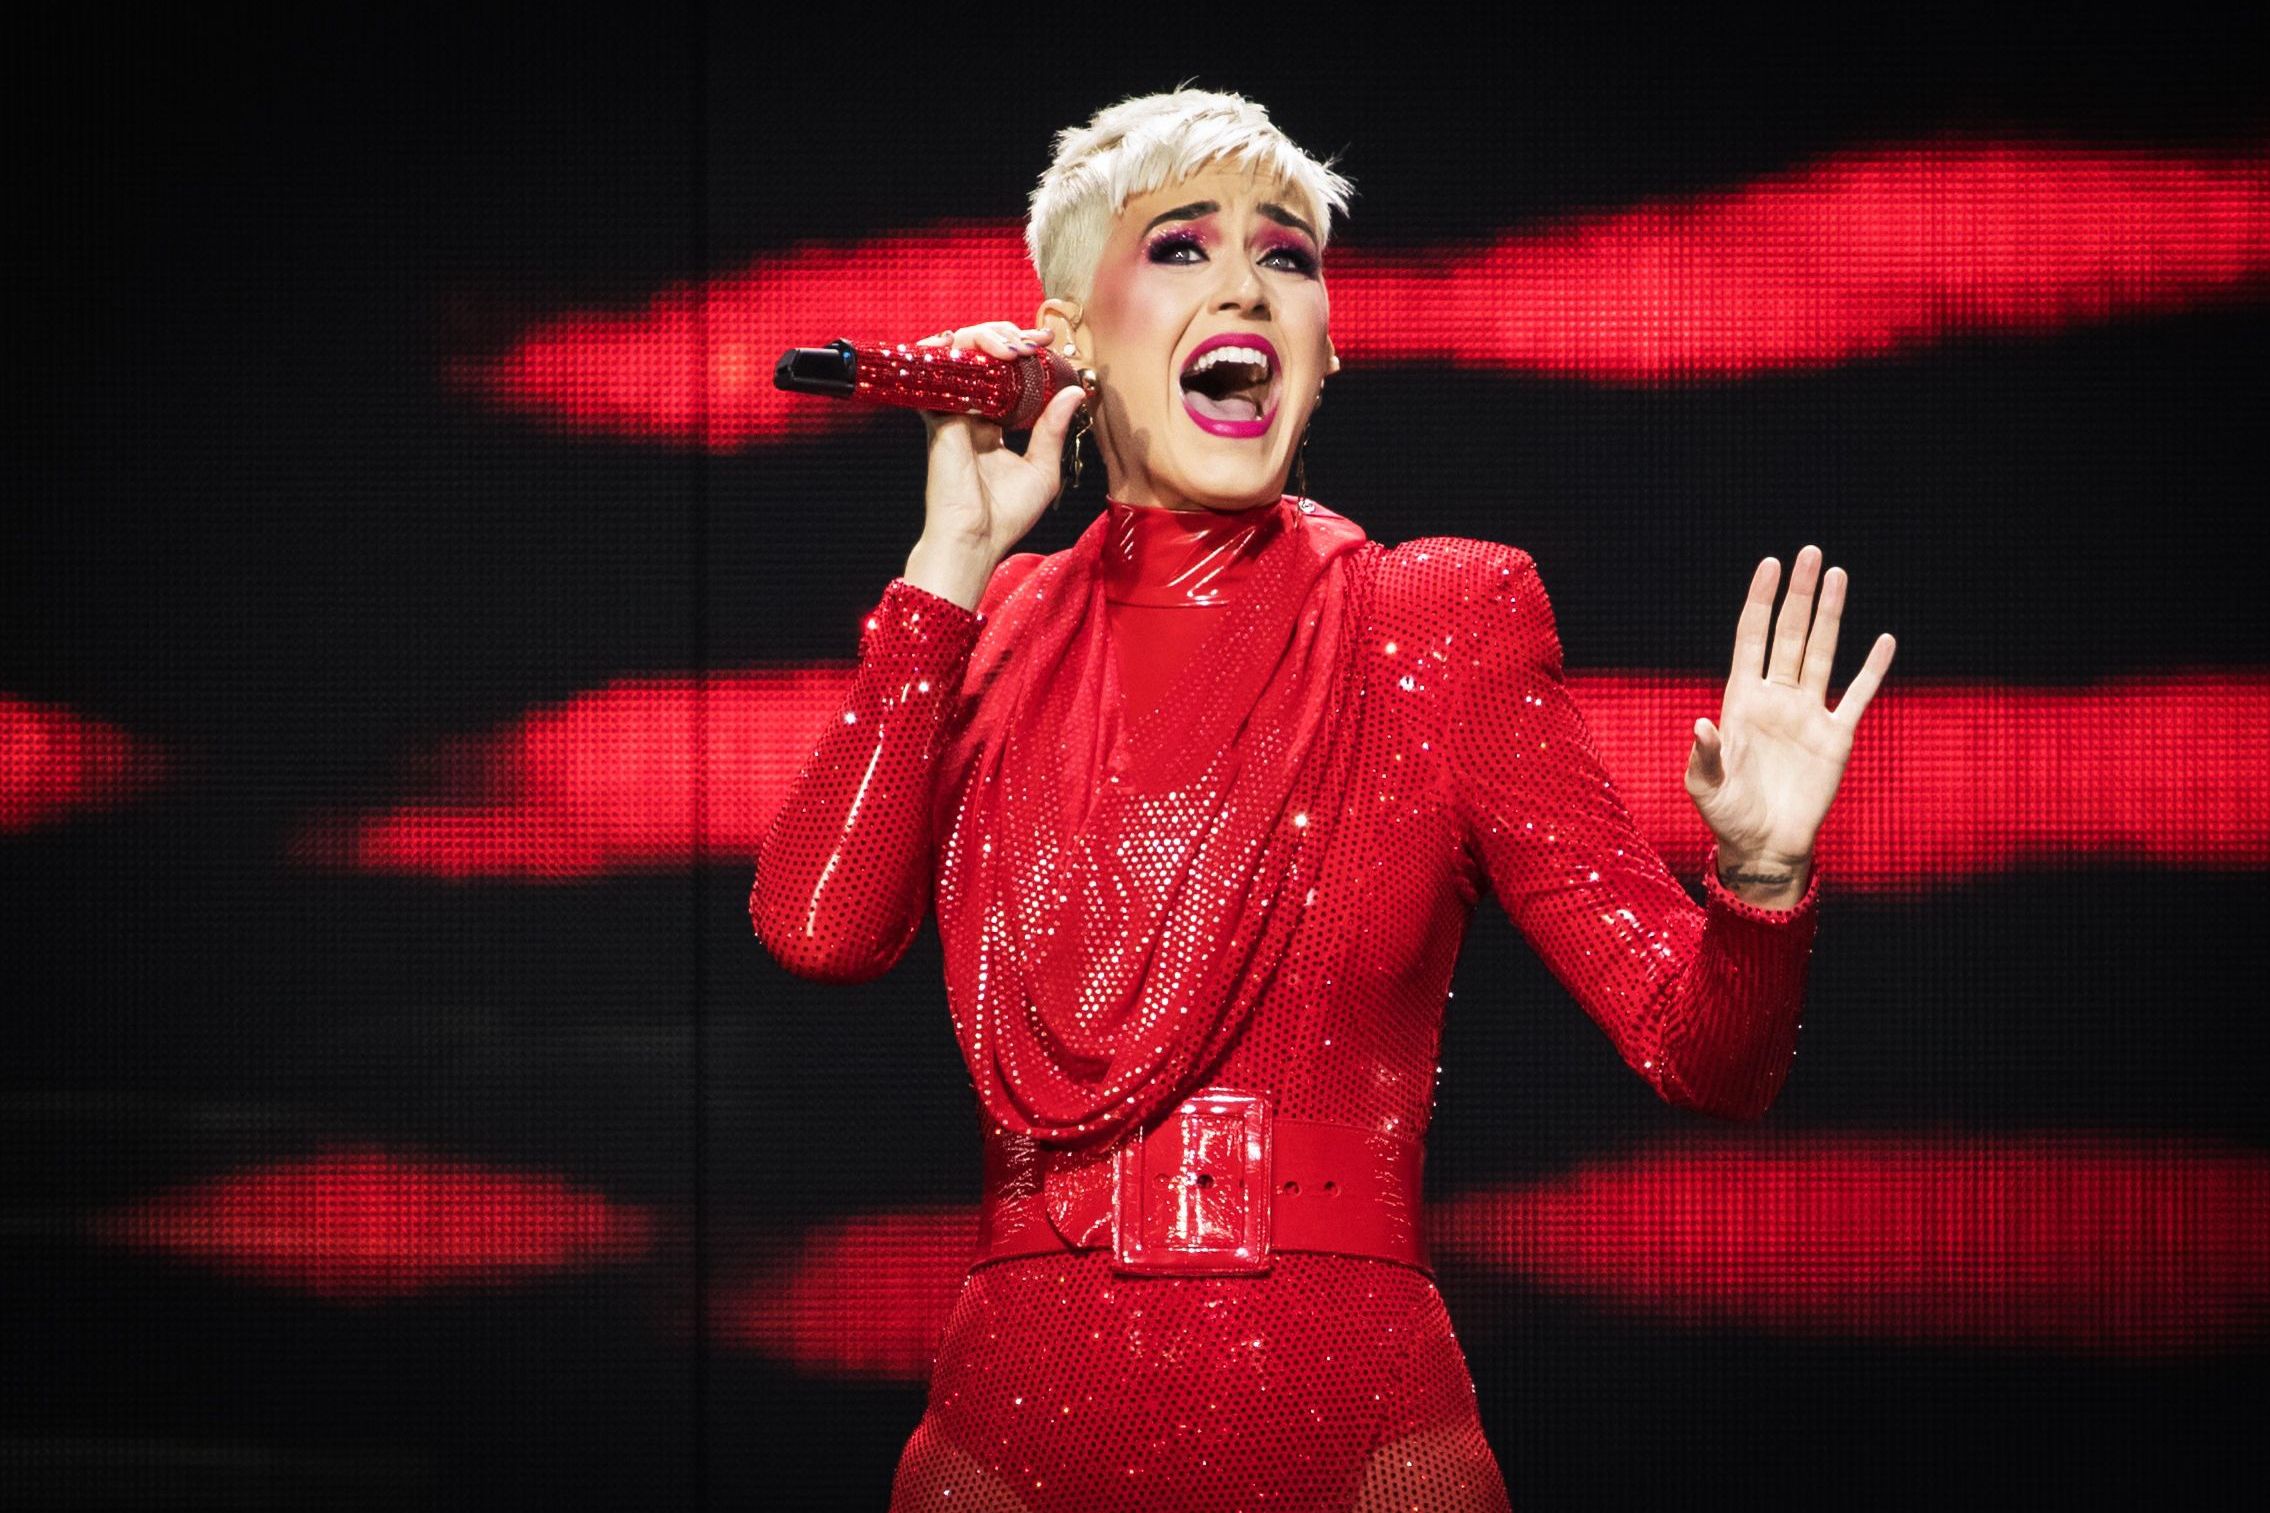 Katy Perry Witness tour review: The pop star delights with a dazzling ...